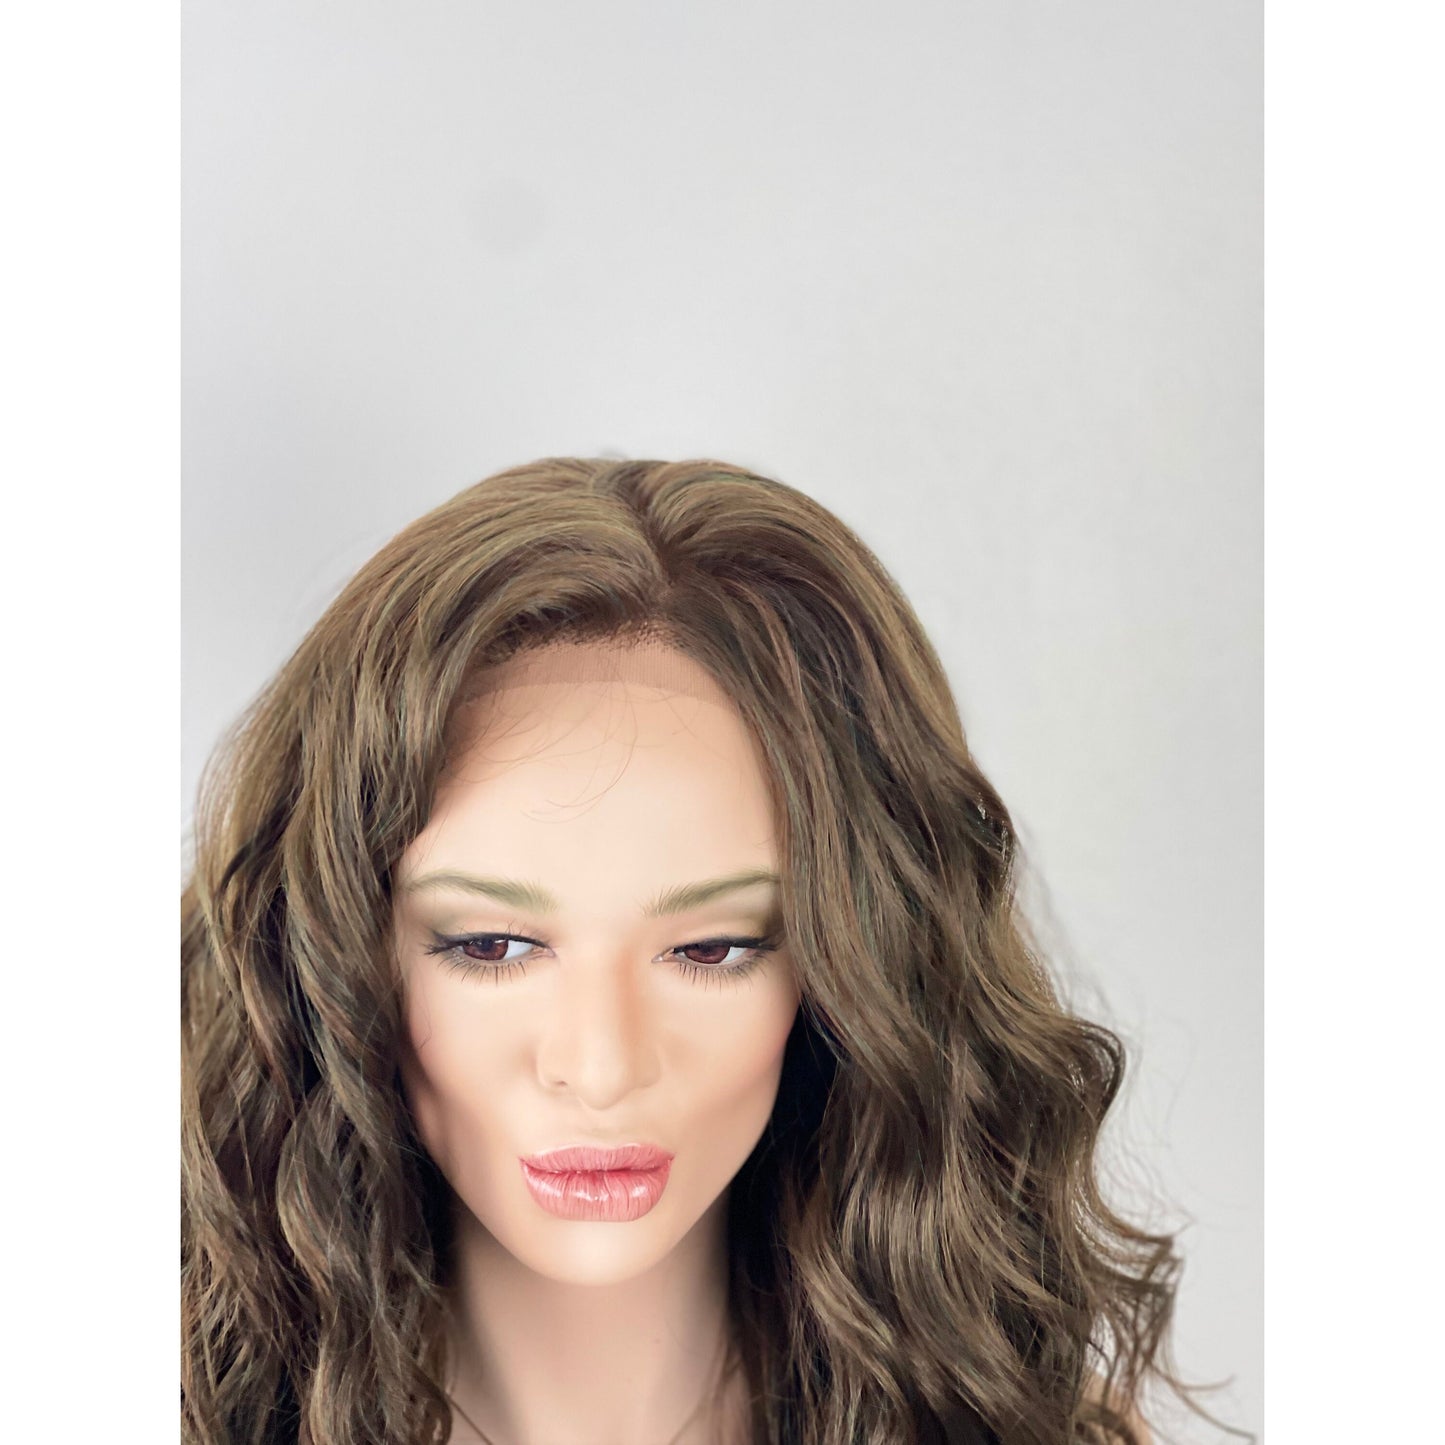 Brown Green PeekABoo Highlights 13x6 wide part lace front wig / Human Hair Blend Wig